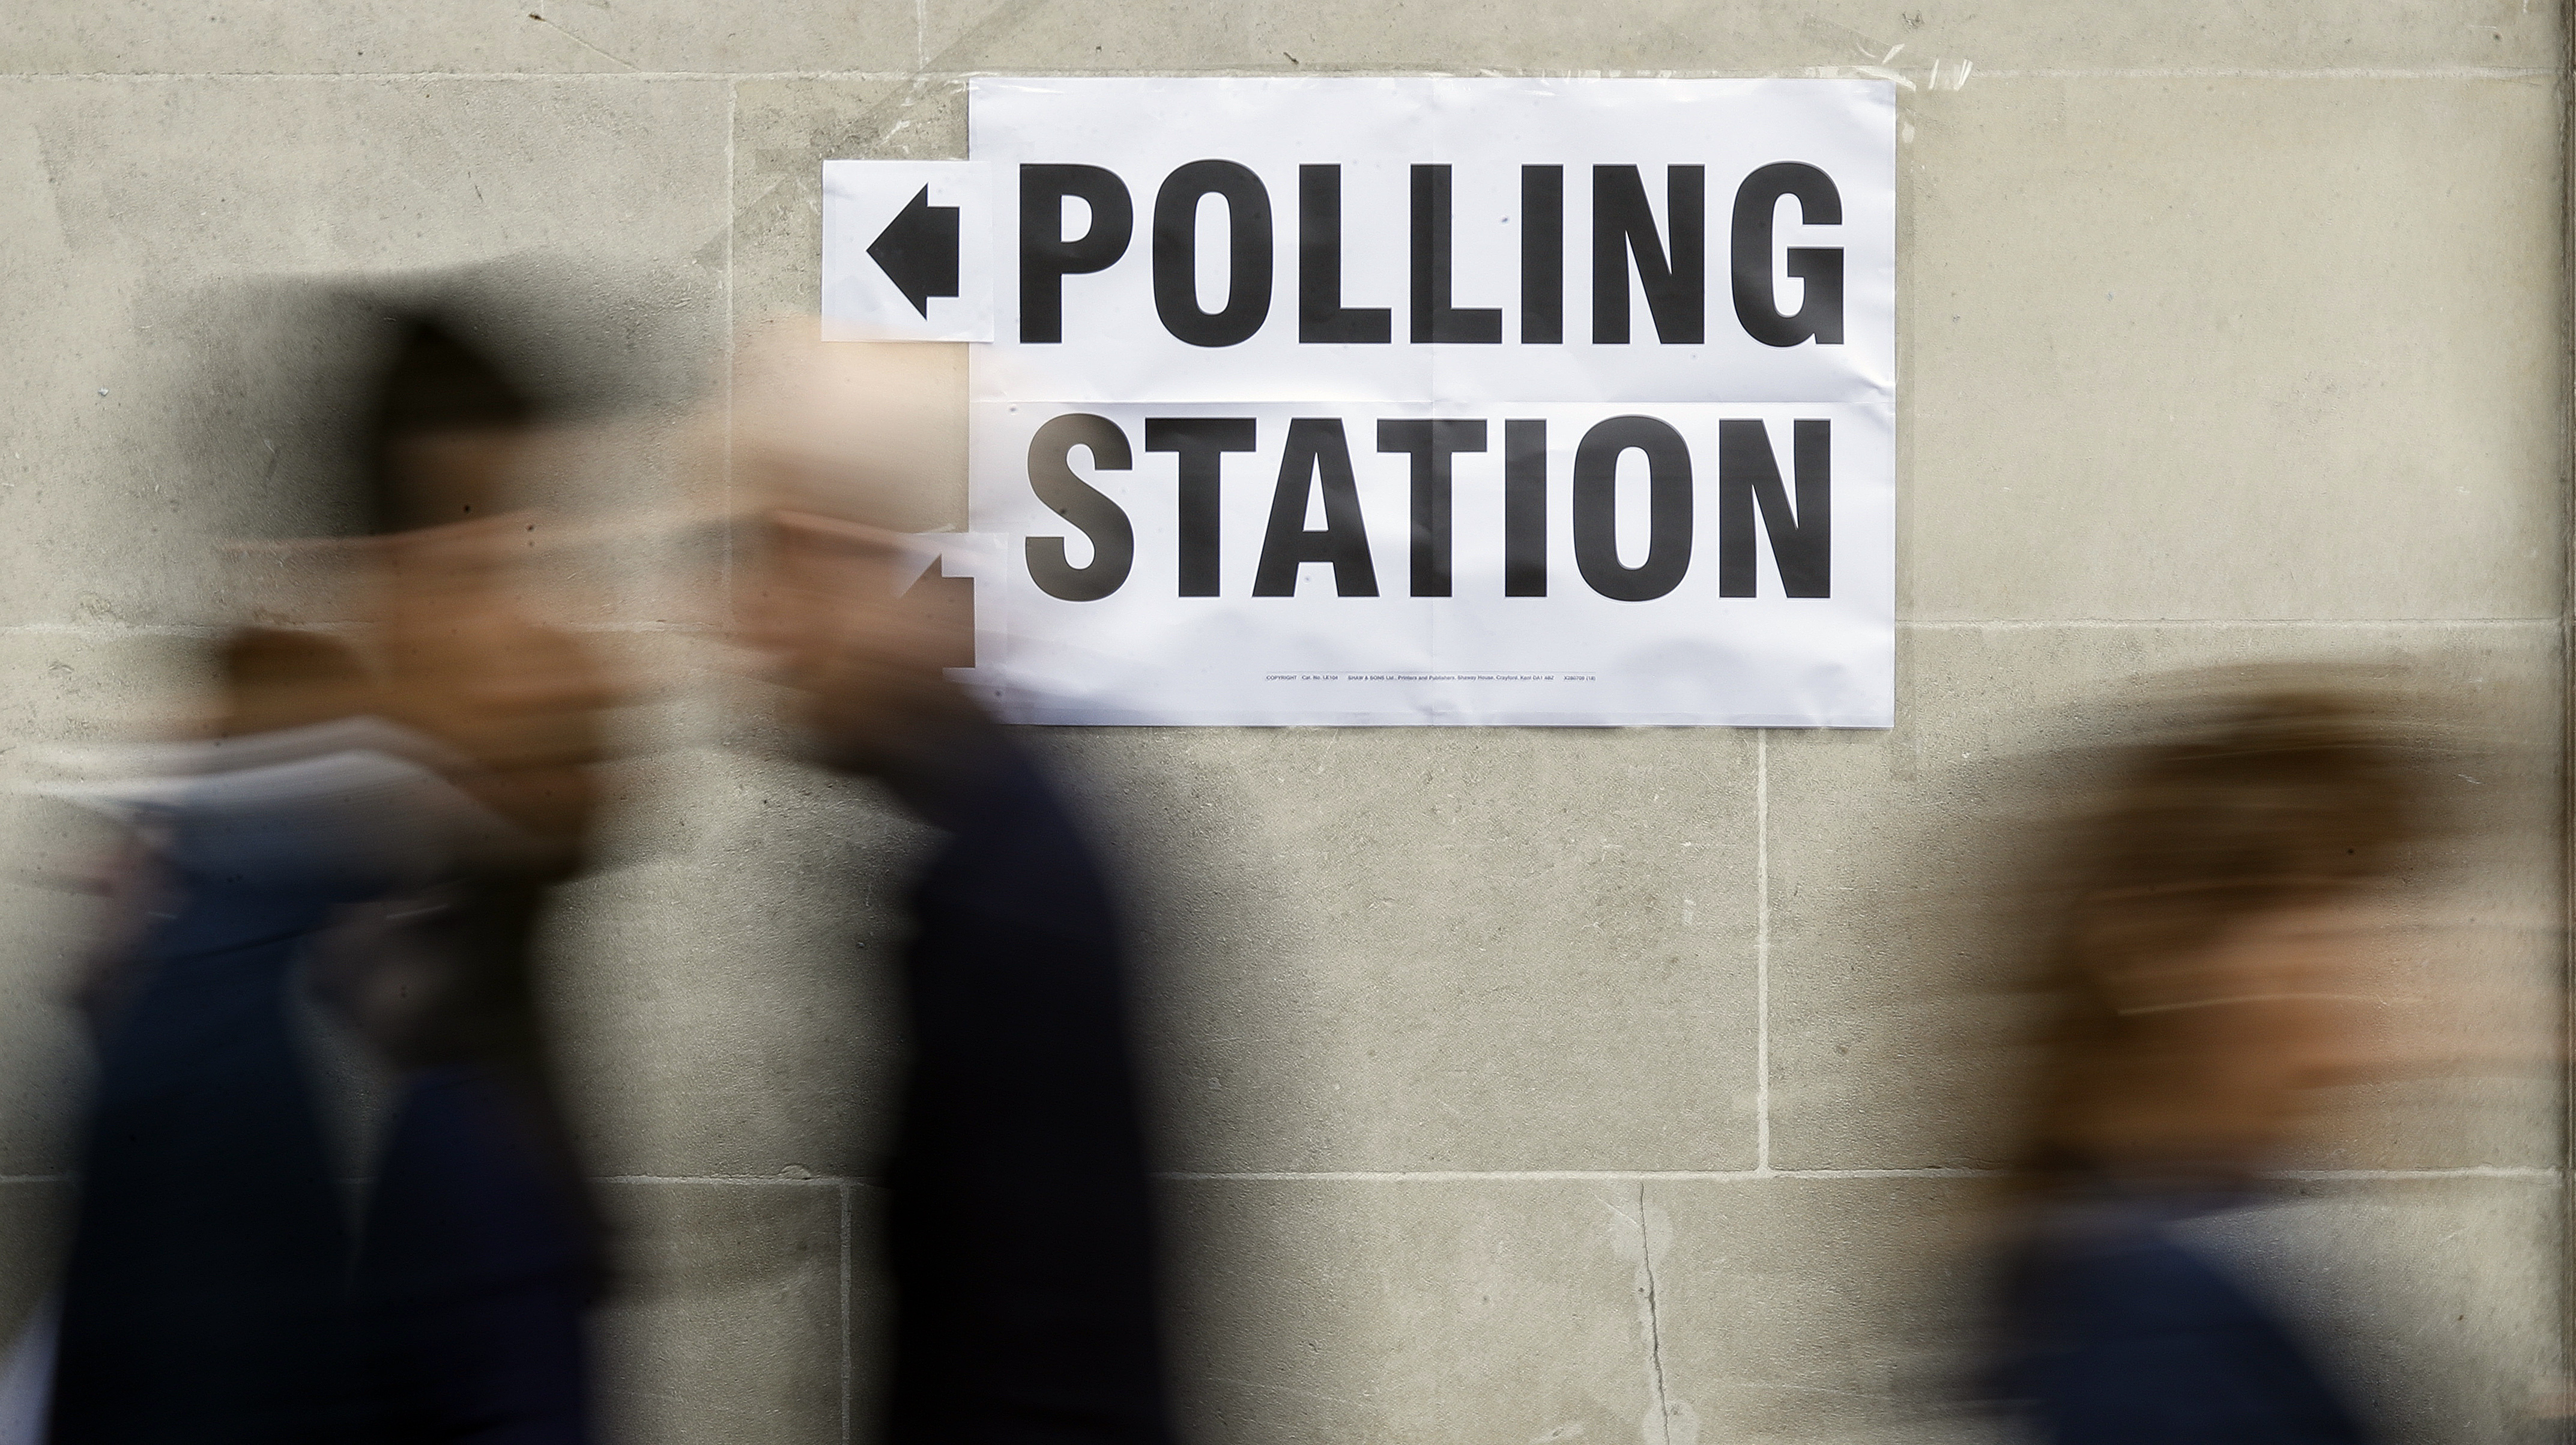 FILE - People walk to a polling station for the British general election in Westminster, London, Thursday, June 8, 2017. From red wall to king's speech, UK elections have a vocabulary all their own. (AP Photo/Frank Augstein, File)